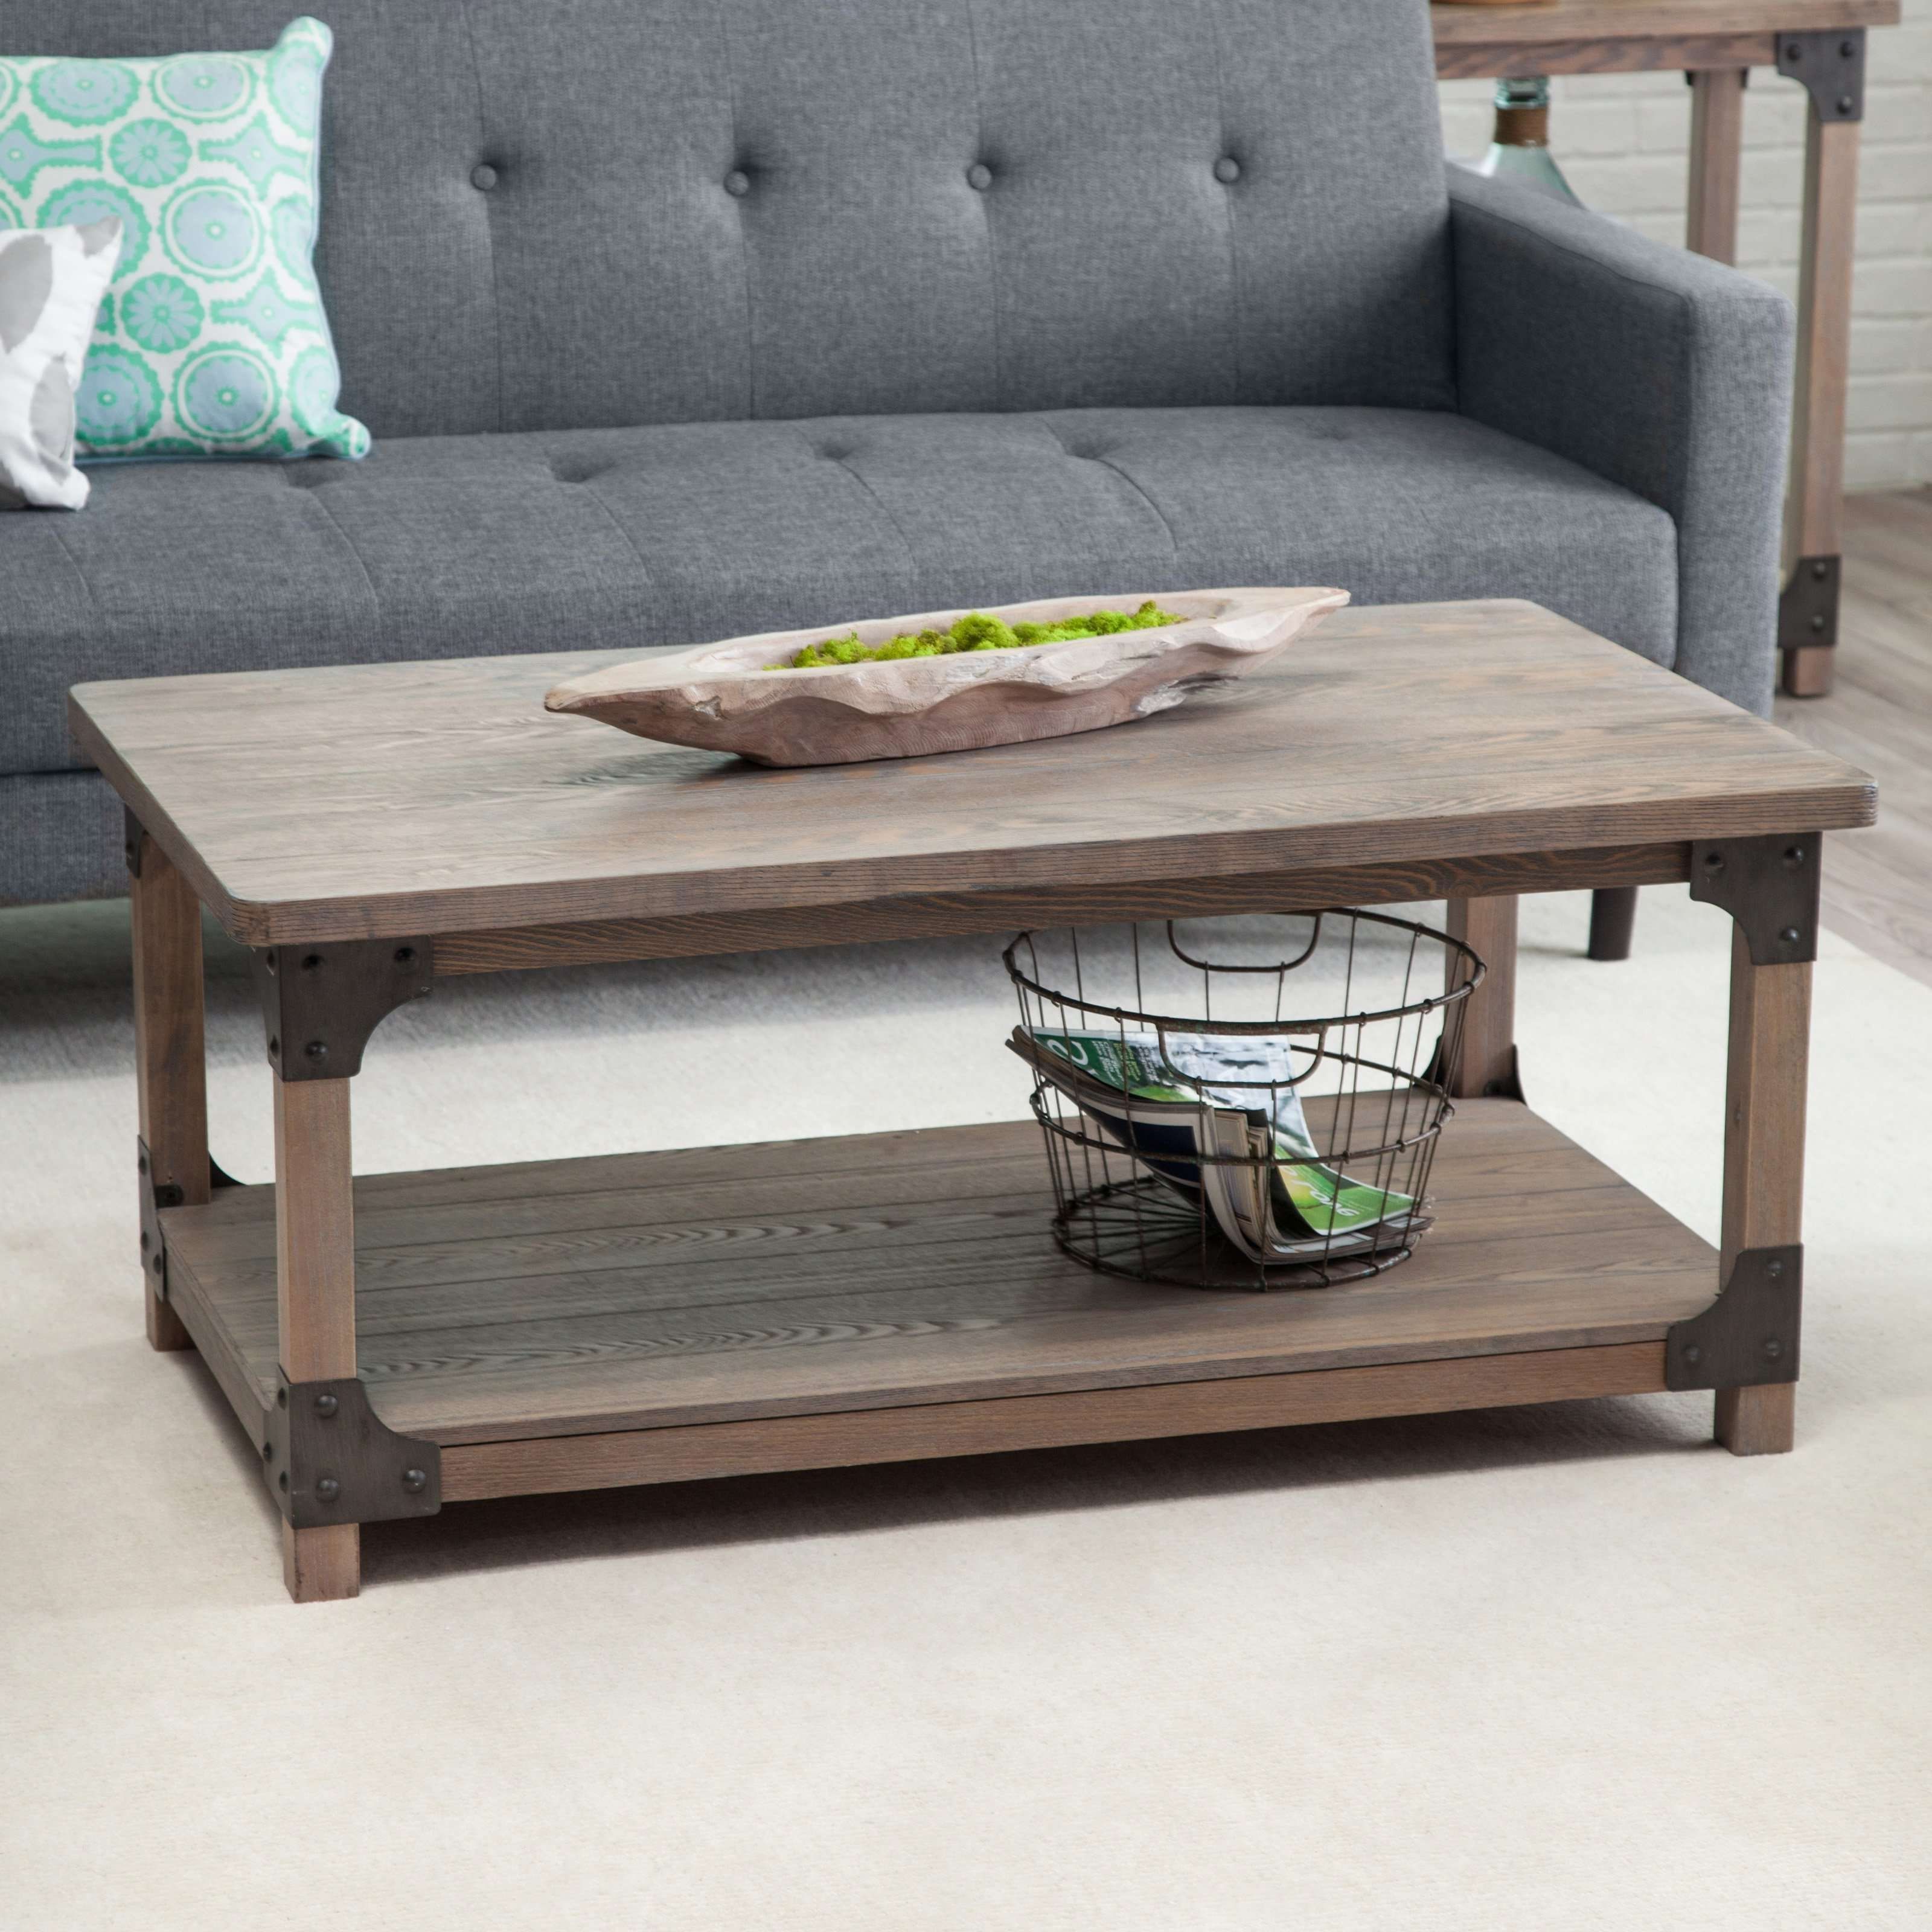 Belham Living Jamestown Rustic Coffee Table With Unique Driftwood Throughout Fashionable Rustic Coffee Tables With Bottom Shelf (View 3 of 20)